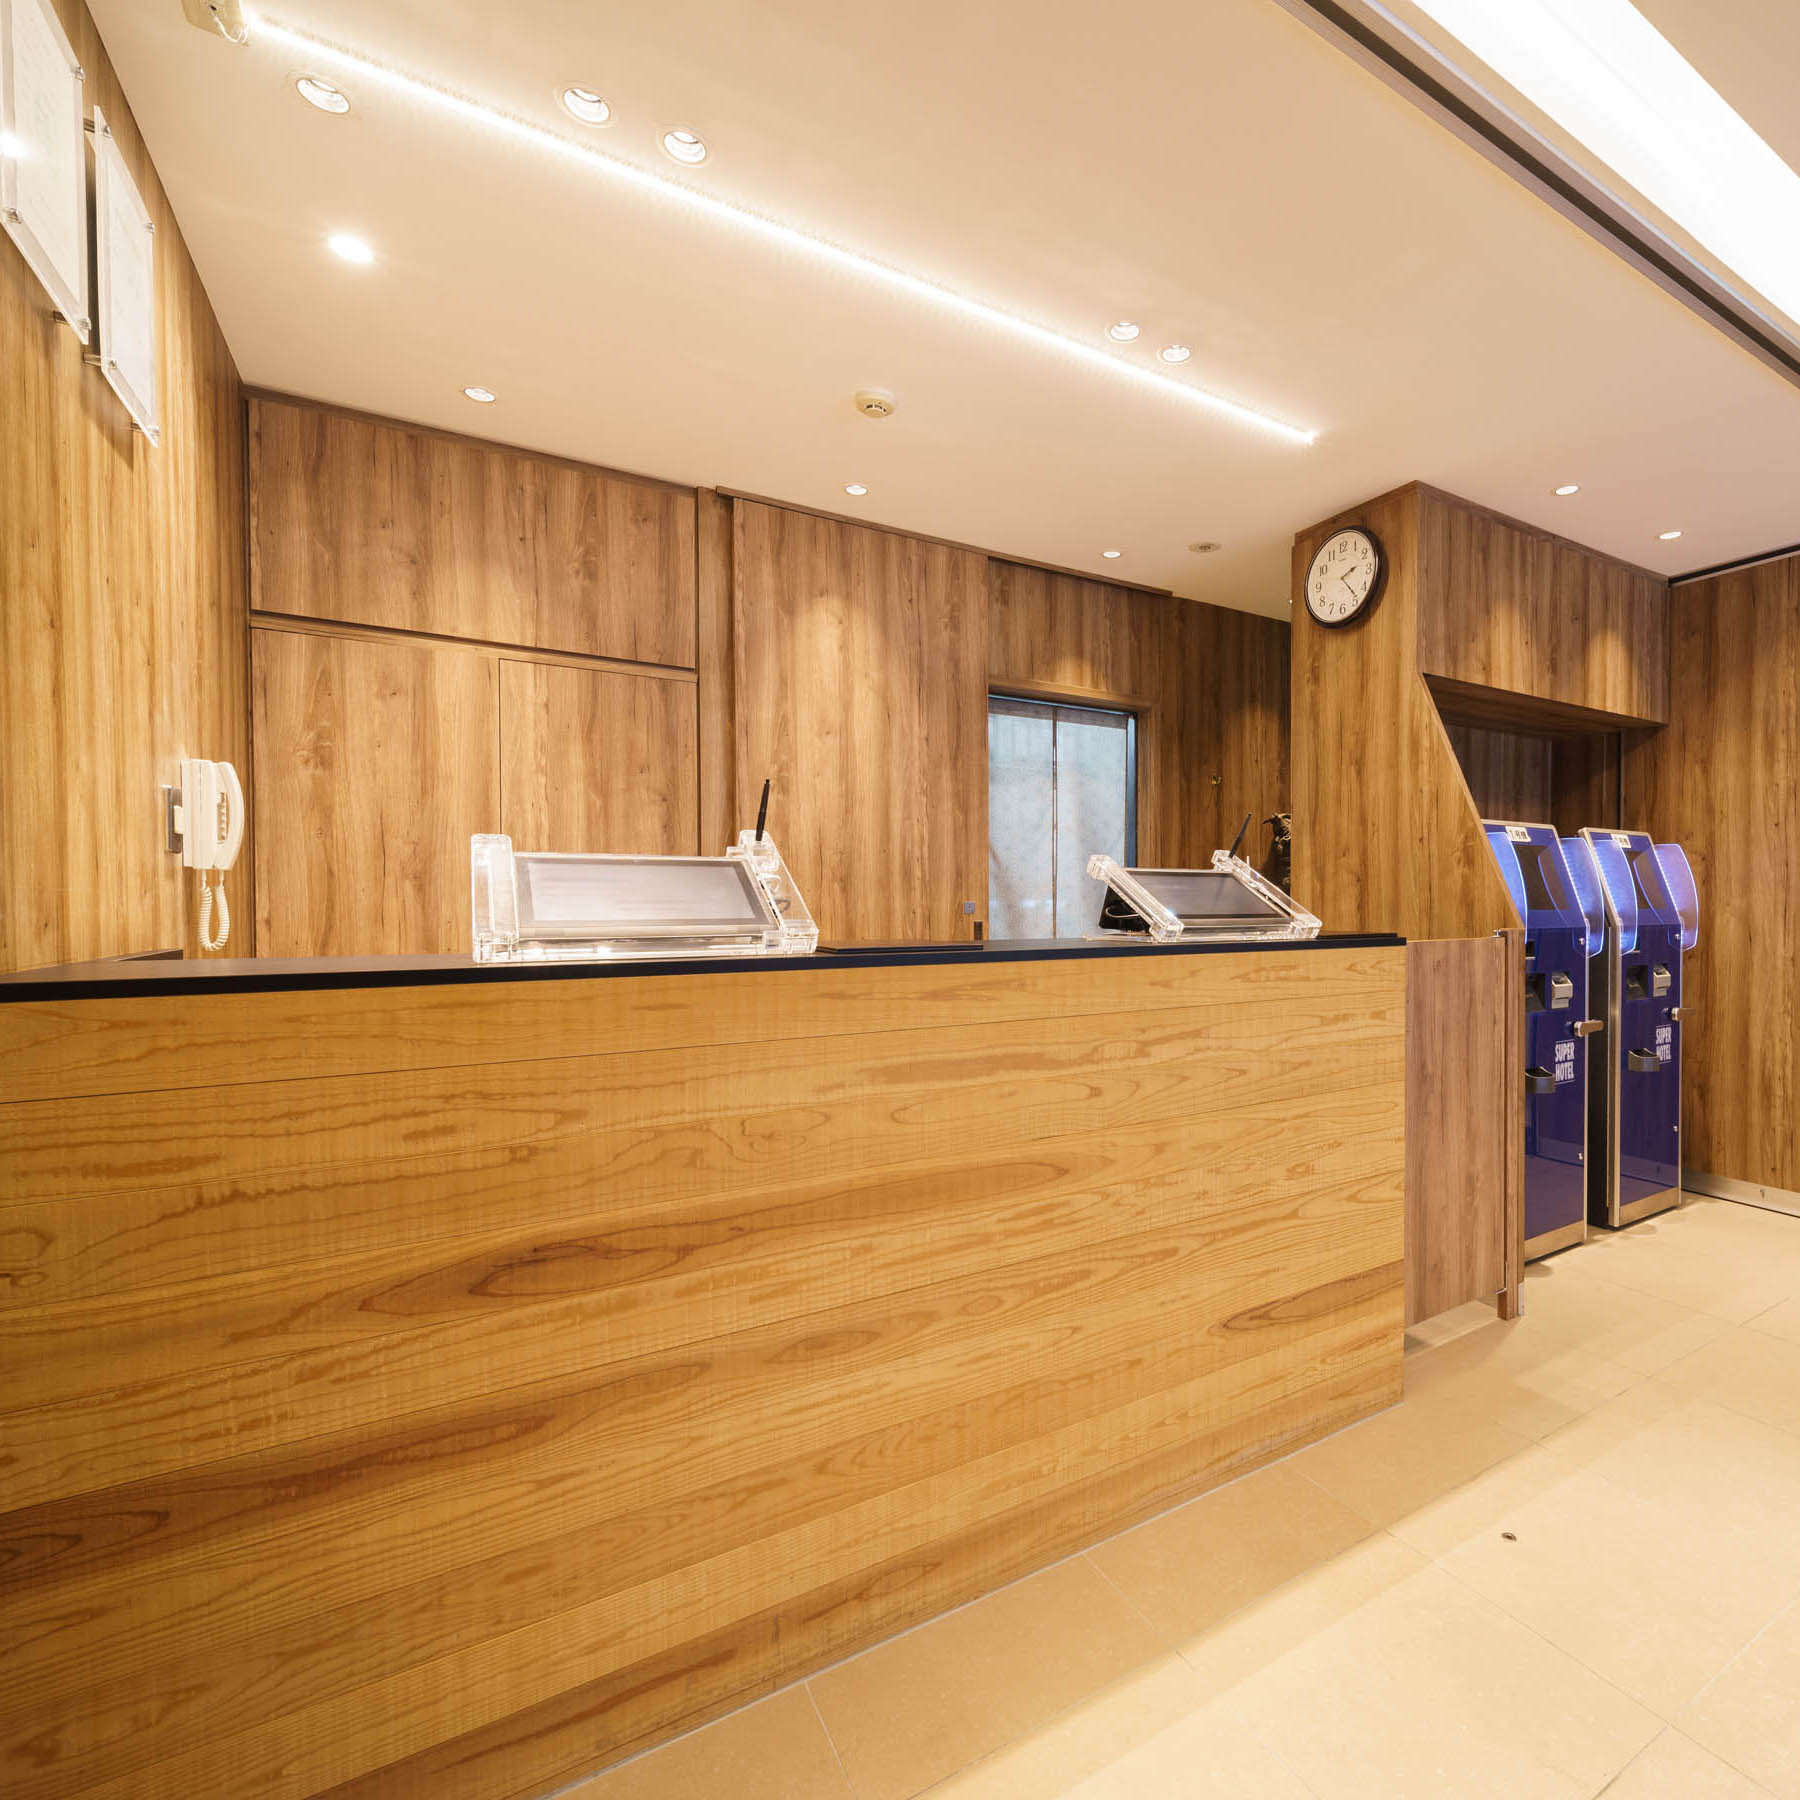 Super Hotel Chiba Ekimae Super Hotel Chiba Eki Mae is conveniently located in the popular Chiba area. The property features a wide range of facilities to make your stay a pleasant experience. Facilities like facilities for di